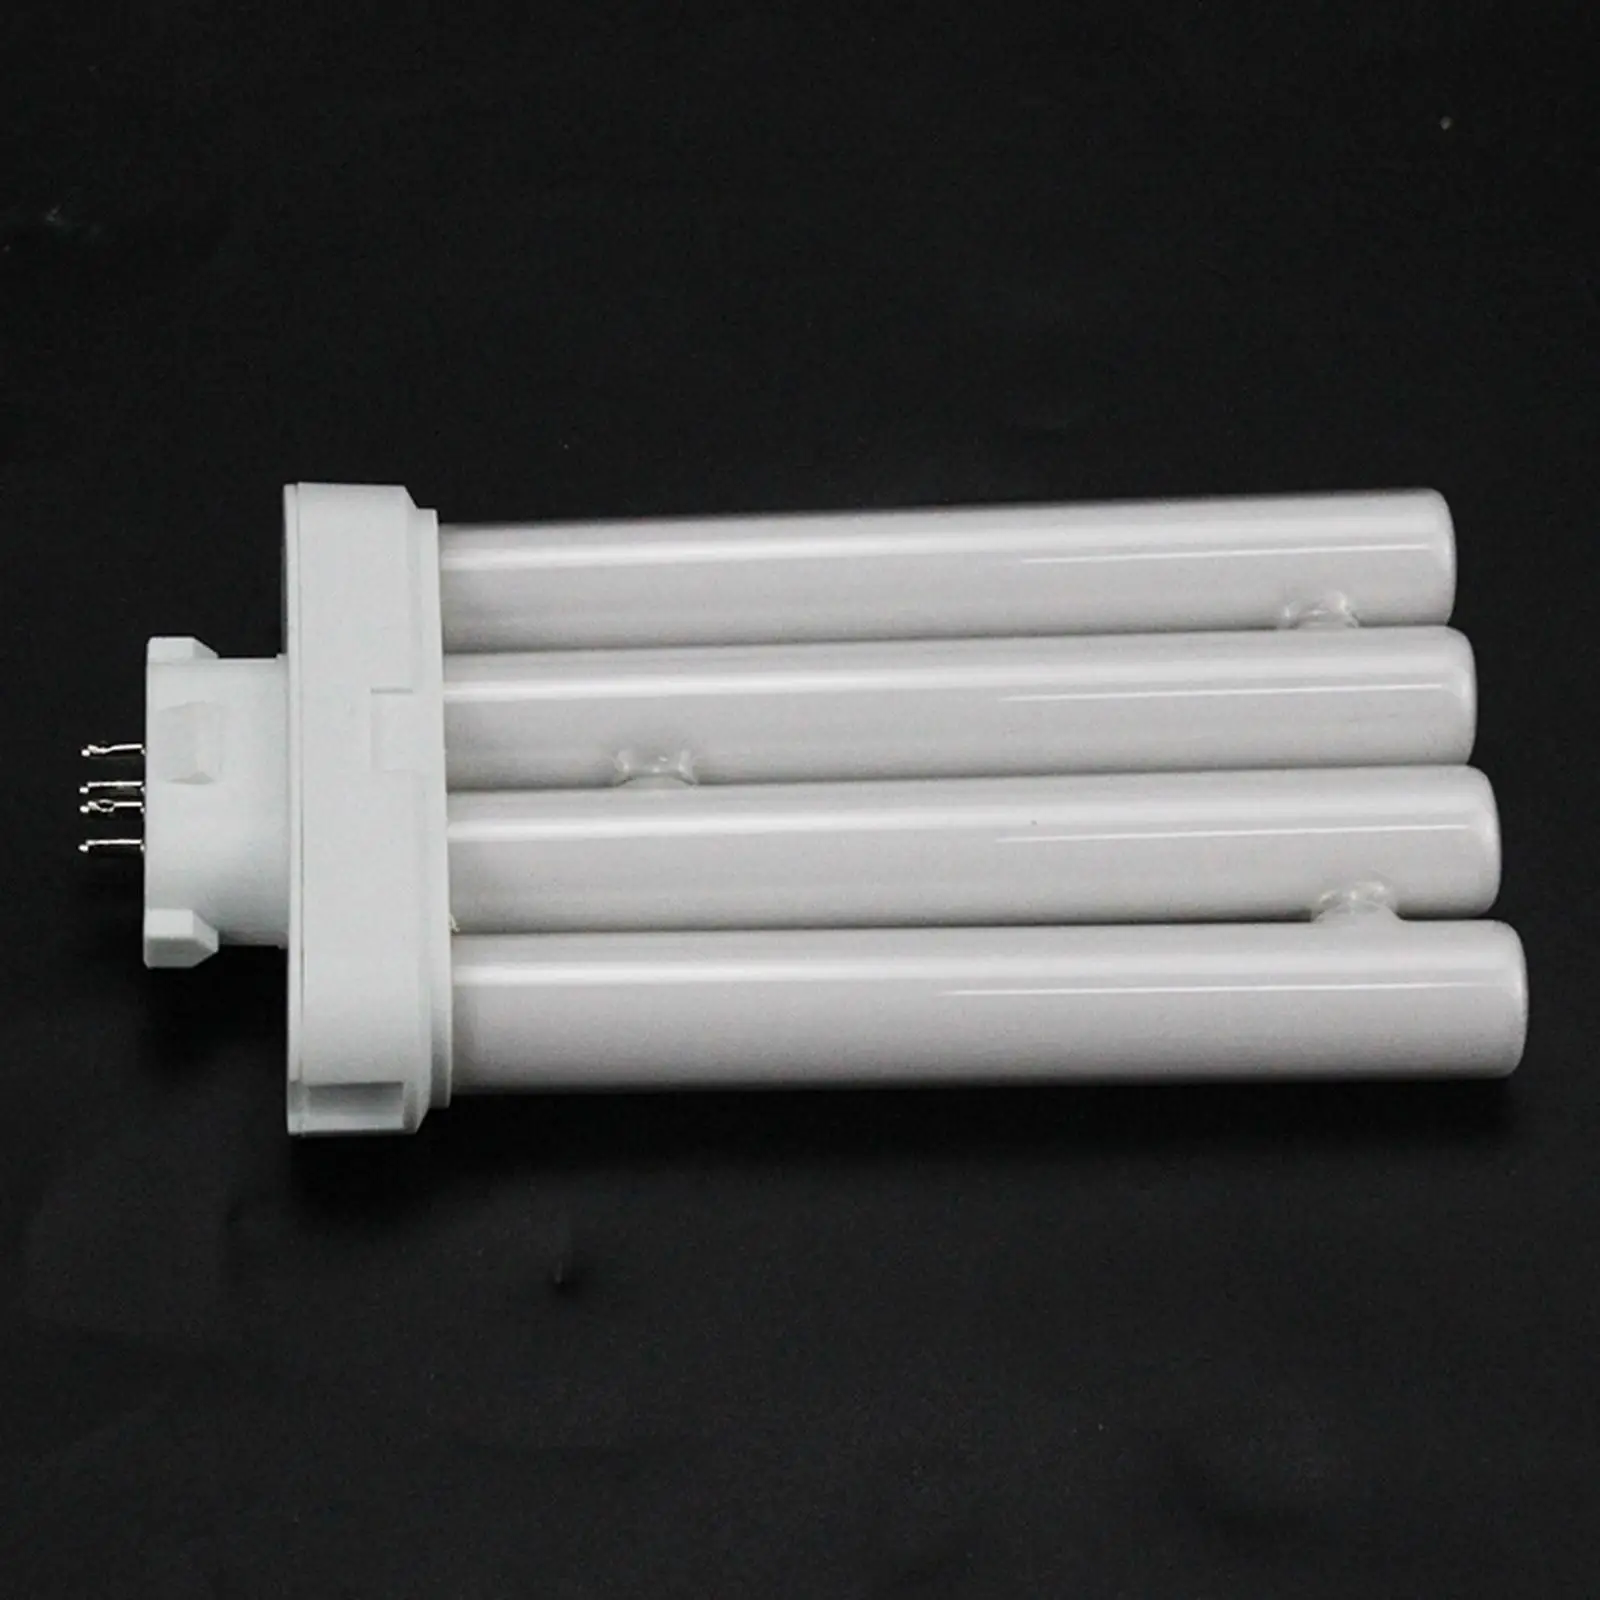 Quad Tube Lamp Portable Replacement Easy to Install Eye Protection Reading Tube Light Fluorescent Bulb Crafts Fluorescent Lamp